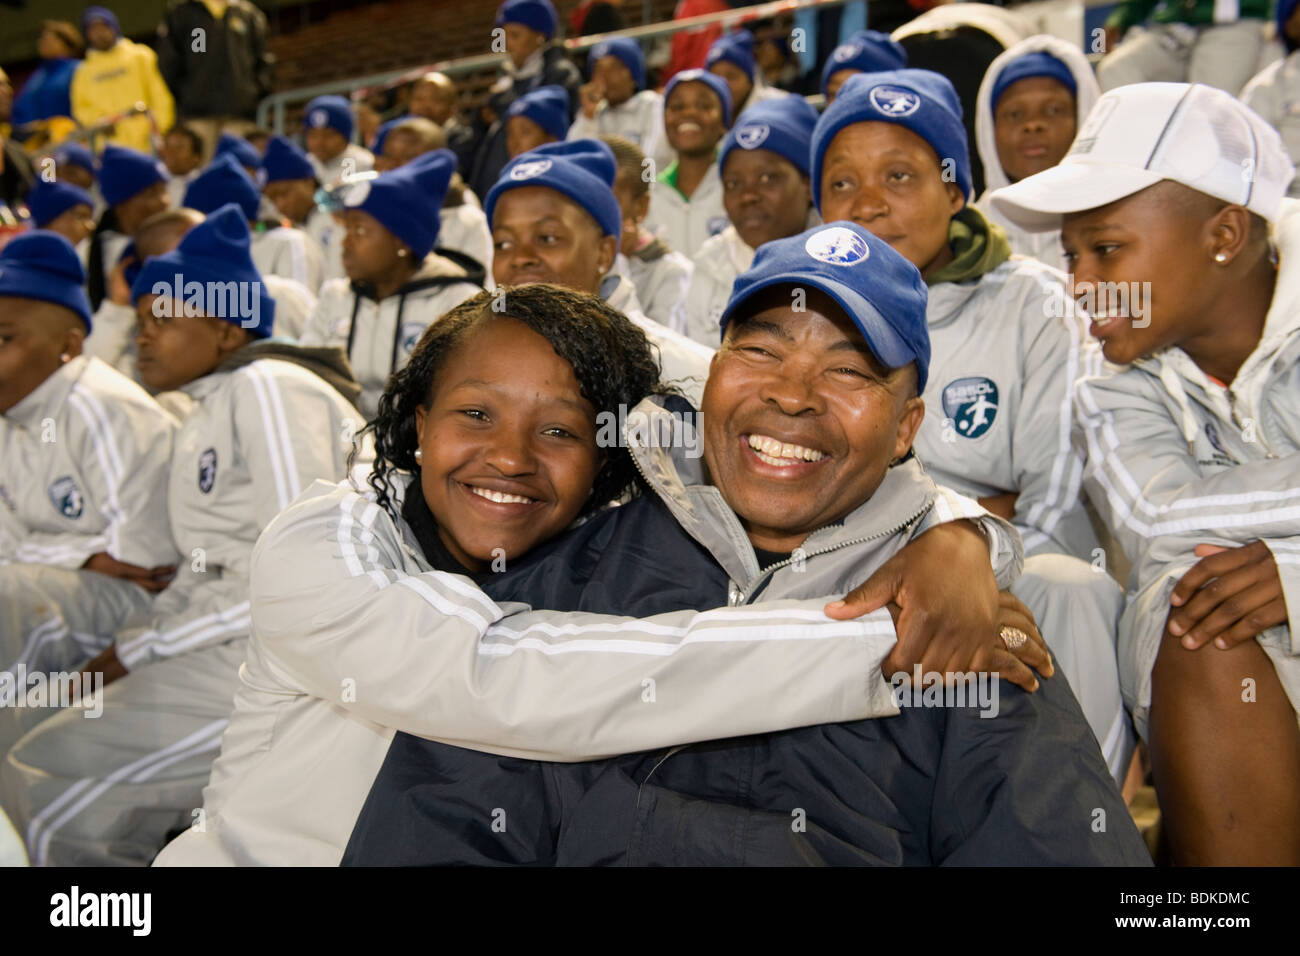 SOCCER FAN HUGGING, NEWLANDS STADIUM, CAPE TOWN SOUTH AFRICA Stock Photo